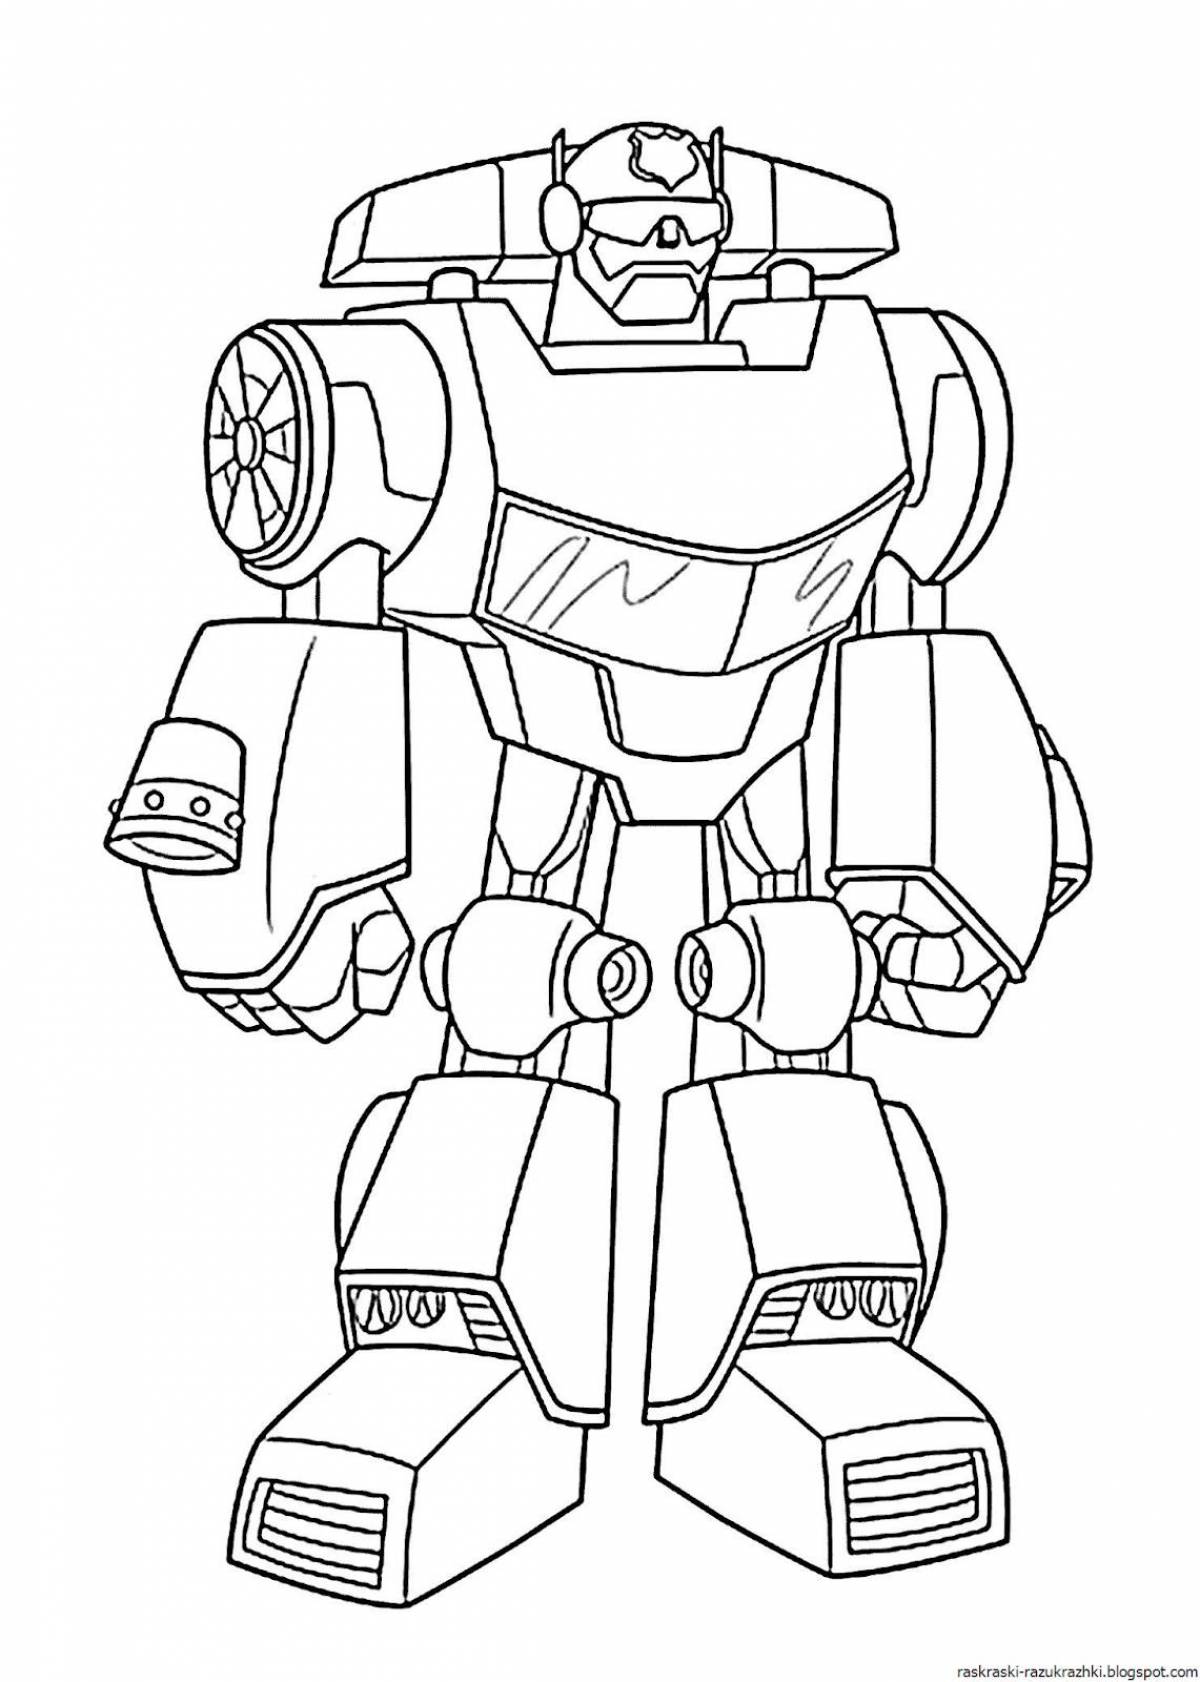 Creative tobot coloring page